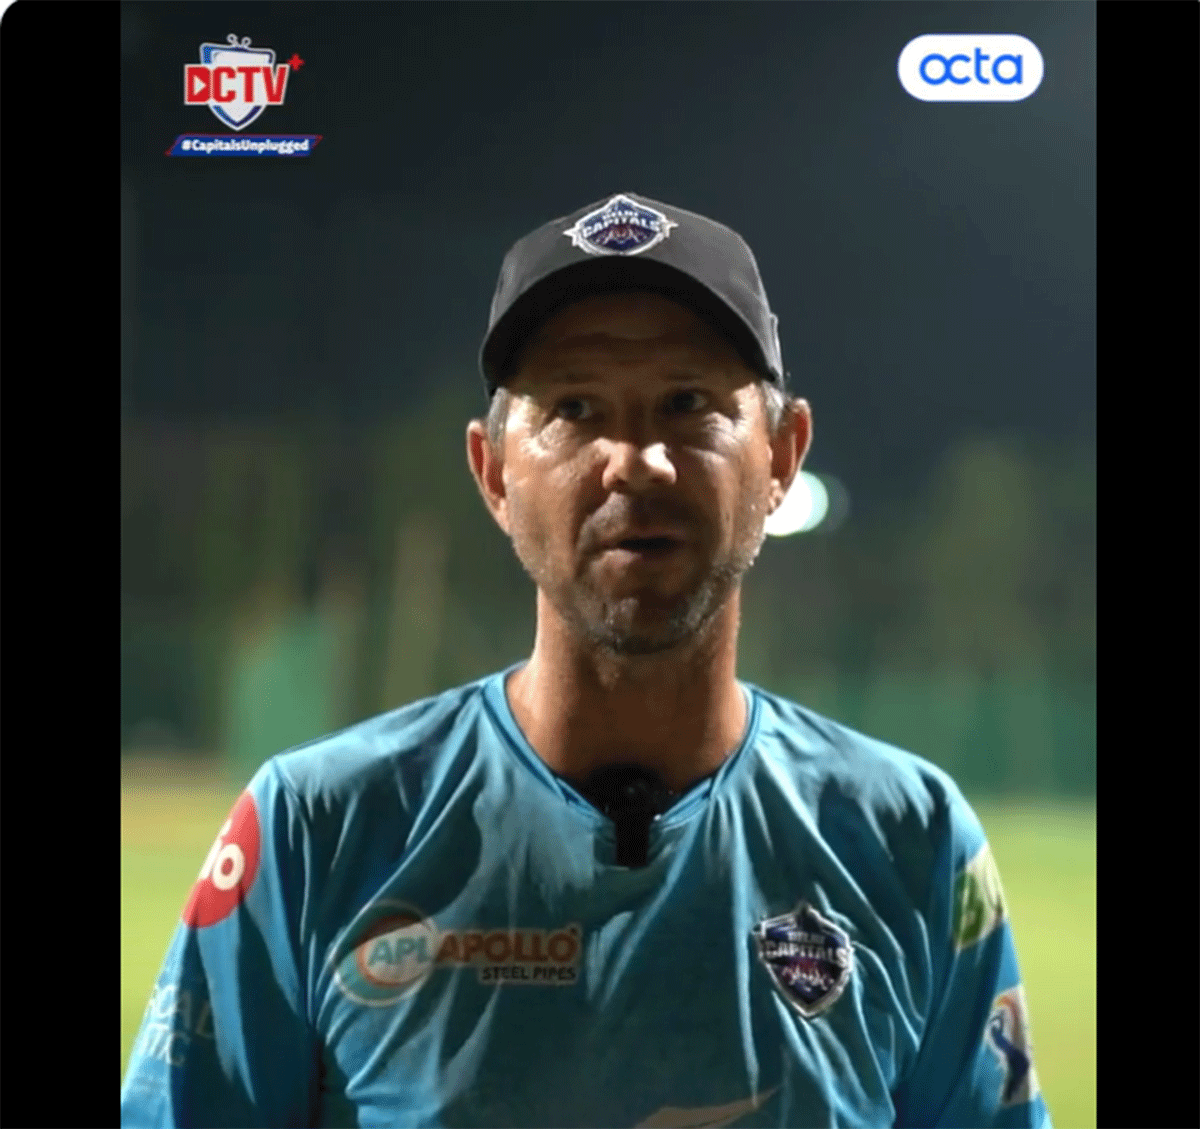 DC coach Ricky Ponting reckons his team has had it tougher than others in the IPL so far this season